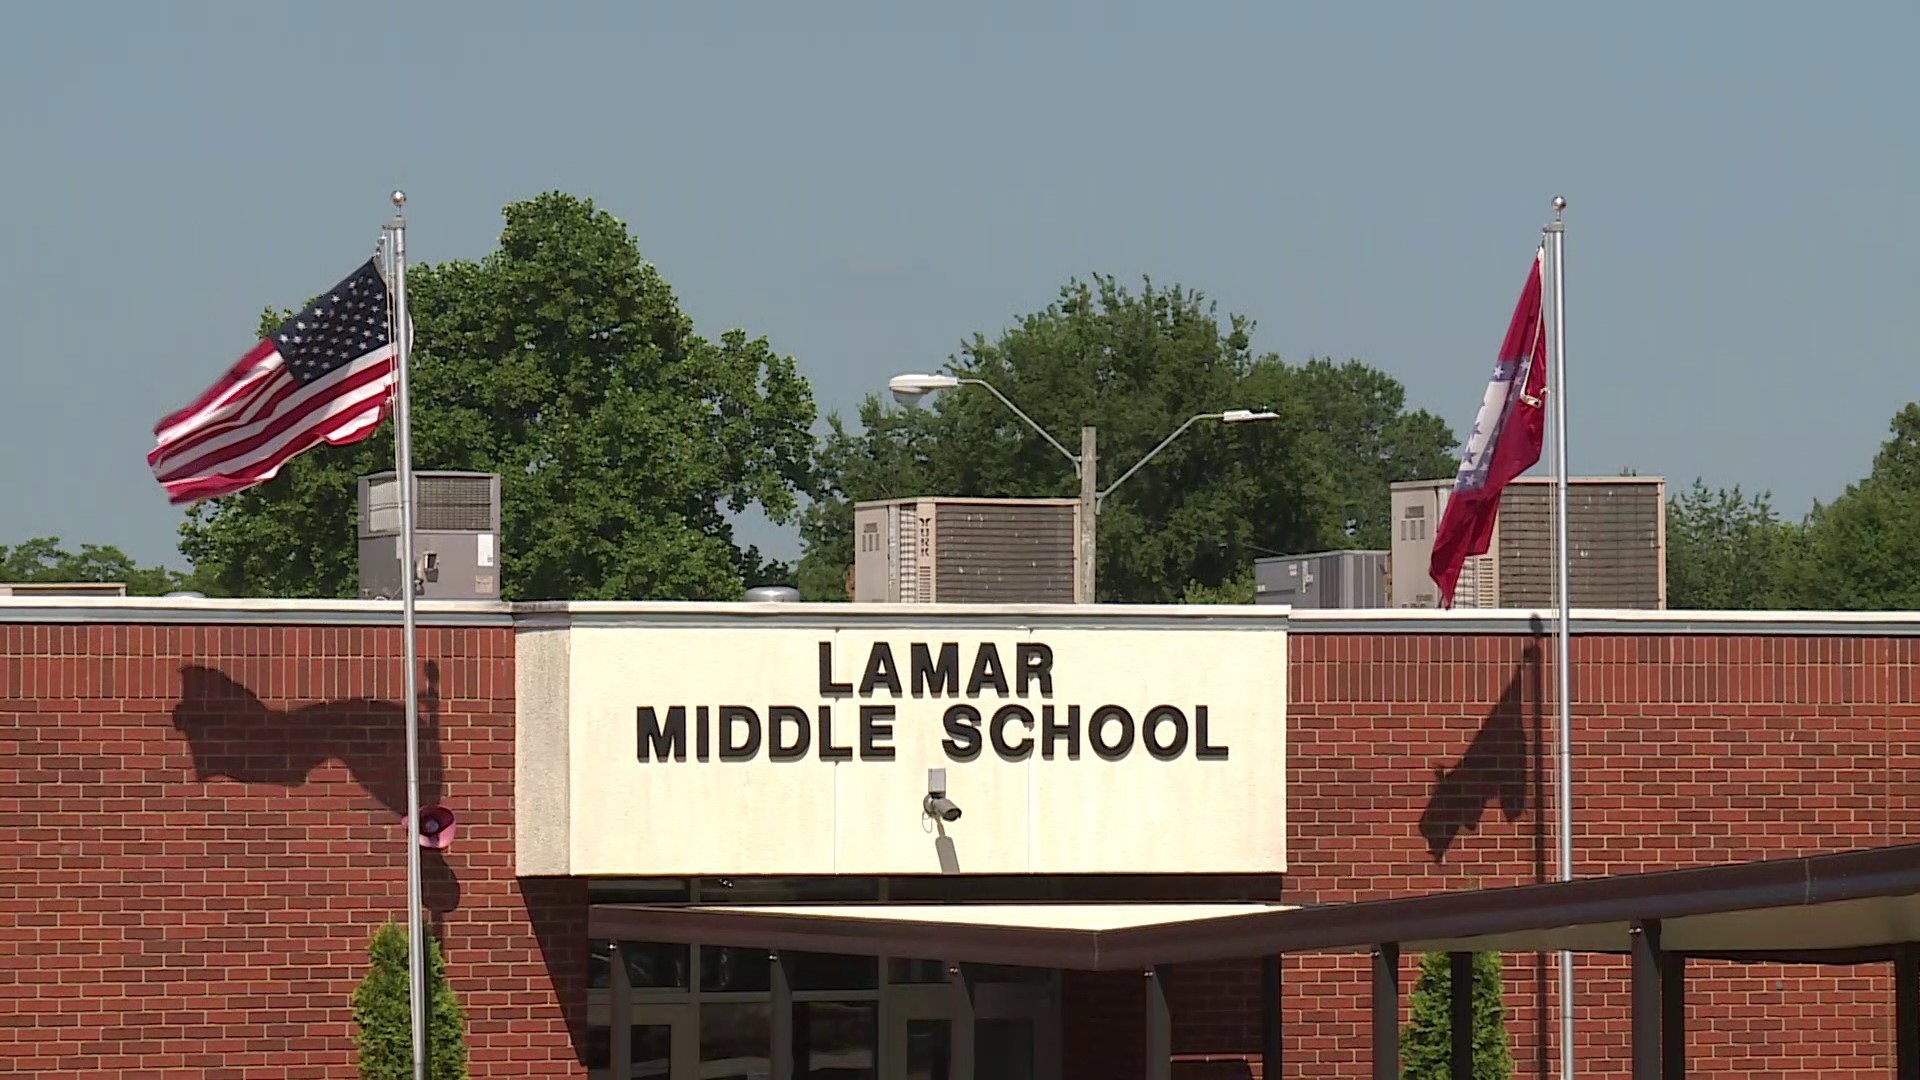 Lamar School District announced that authorities found no evidence of wrongdoing in the ongoing Title IX case and community members are asking for more to be done.